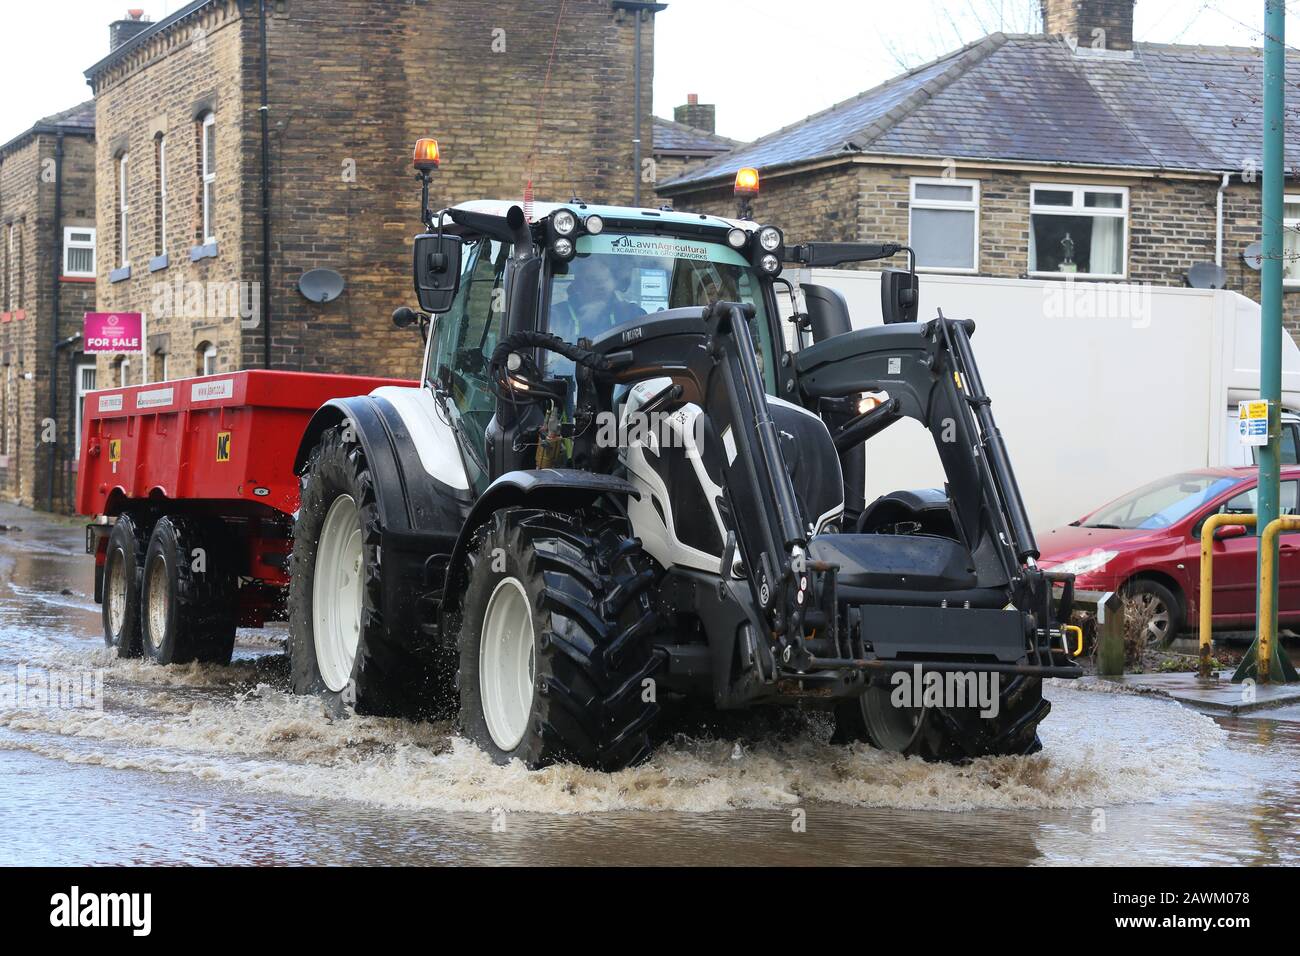 Marsden, UK. 9th February, 2020. Storm Ciara leaves a trail of damage in the Calder valley.  Rain has washed stones and  a railway sleeper onto the Rochdale to Todmorden Road.  A tree has fallen across the railway line.  A tractor is been used to take away flood water and empty it into the Rochdale canal.  Walsden, Calder Valley, West Yorkshire, UK. Credit: Barbara Cook/Alamy Live News Stock Photo